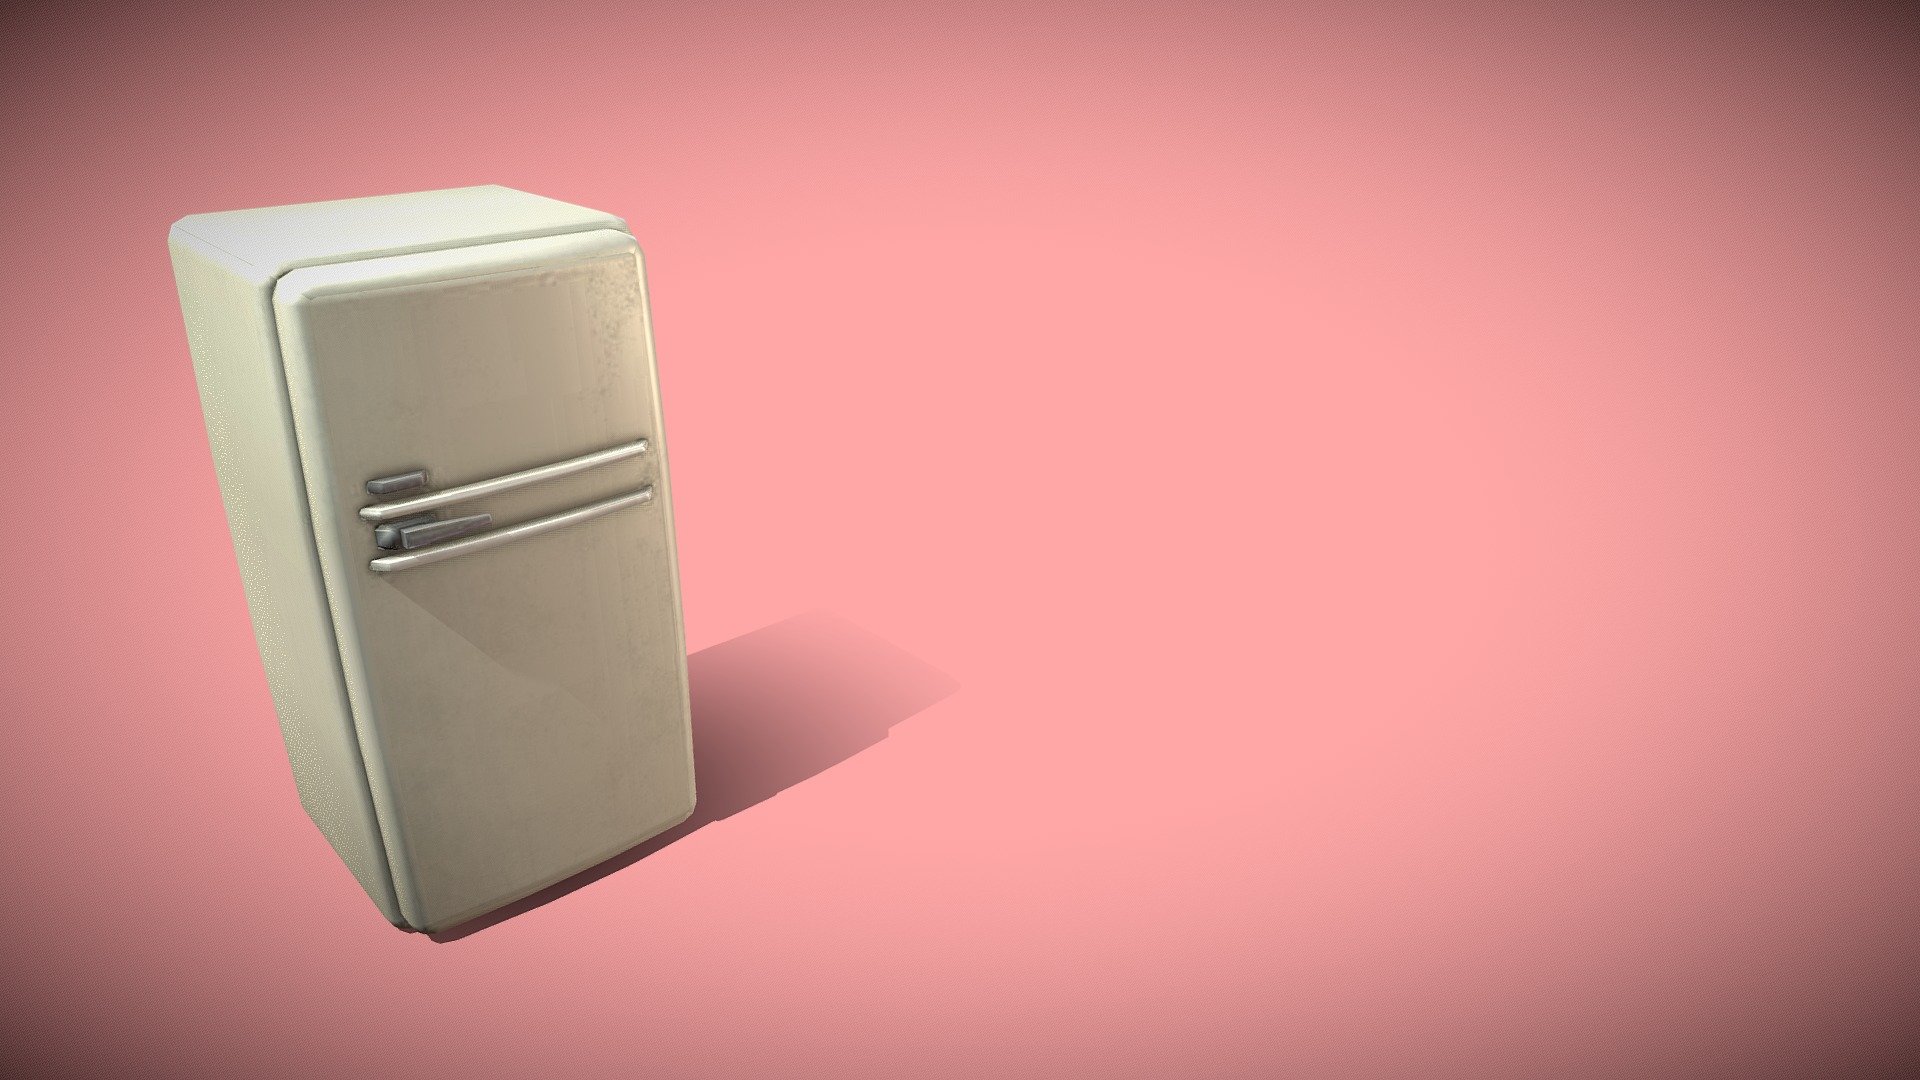 3D model of fridge that i made for our team game unannounced project 3d model